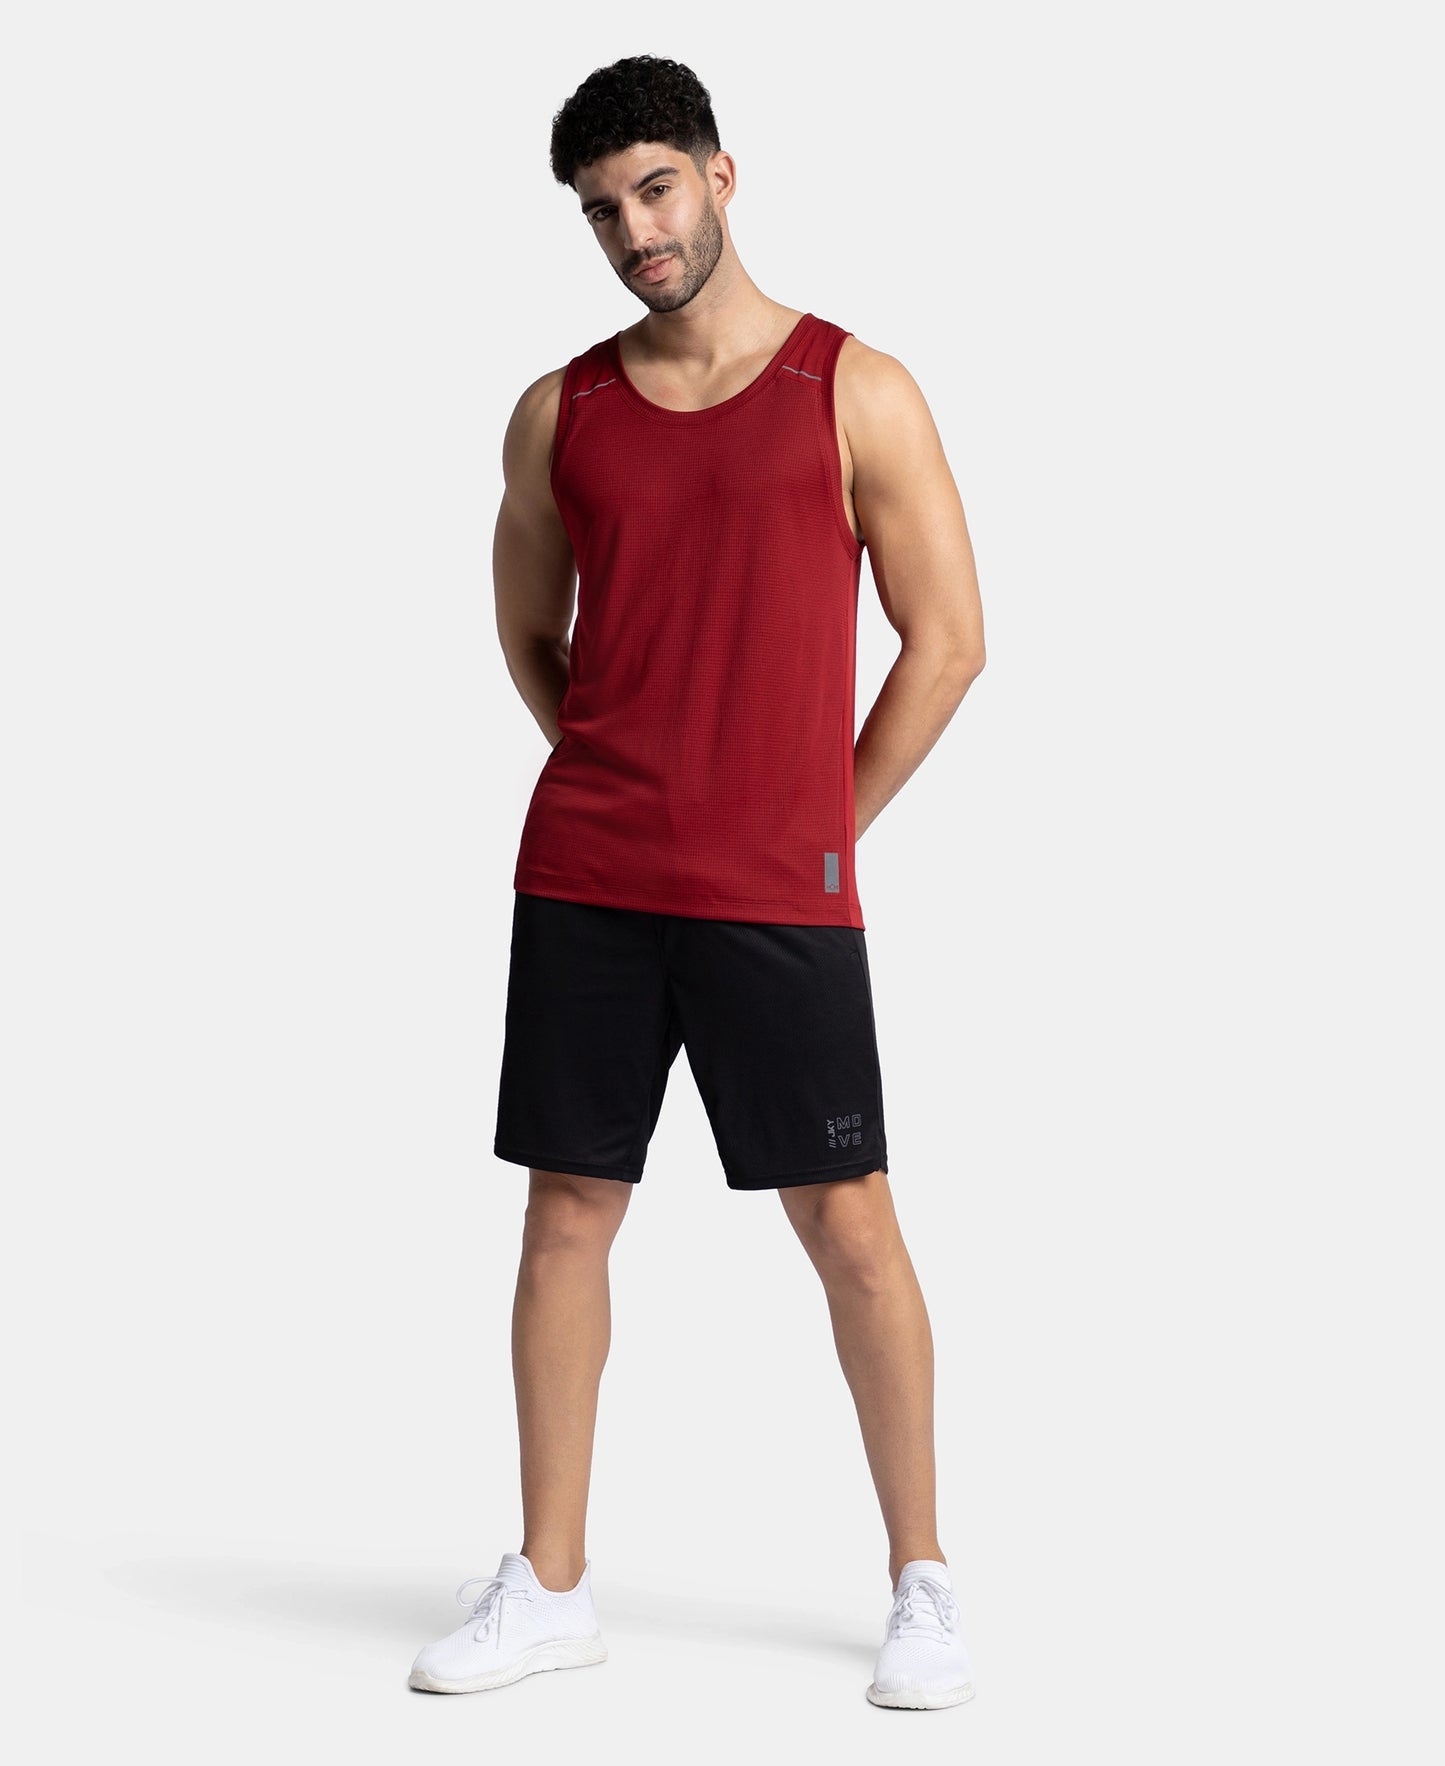 Lightweight Microfiber Solid Tank Top with Breathable Mesh - Sundried Tomato